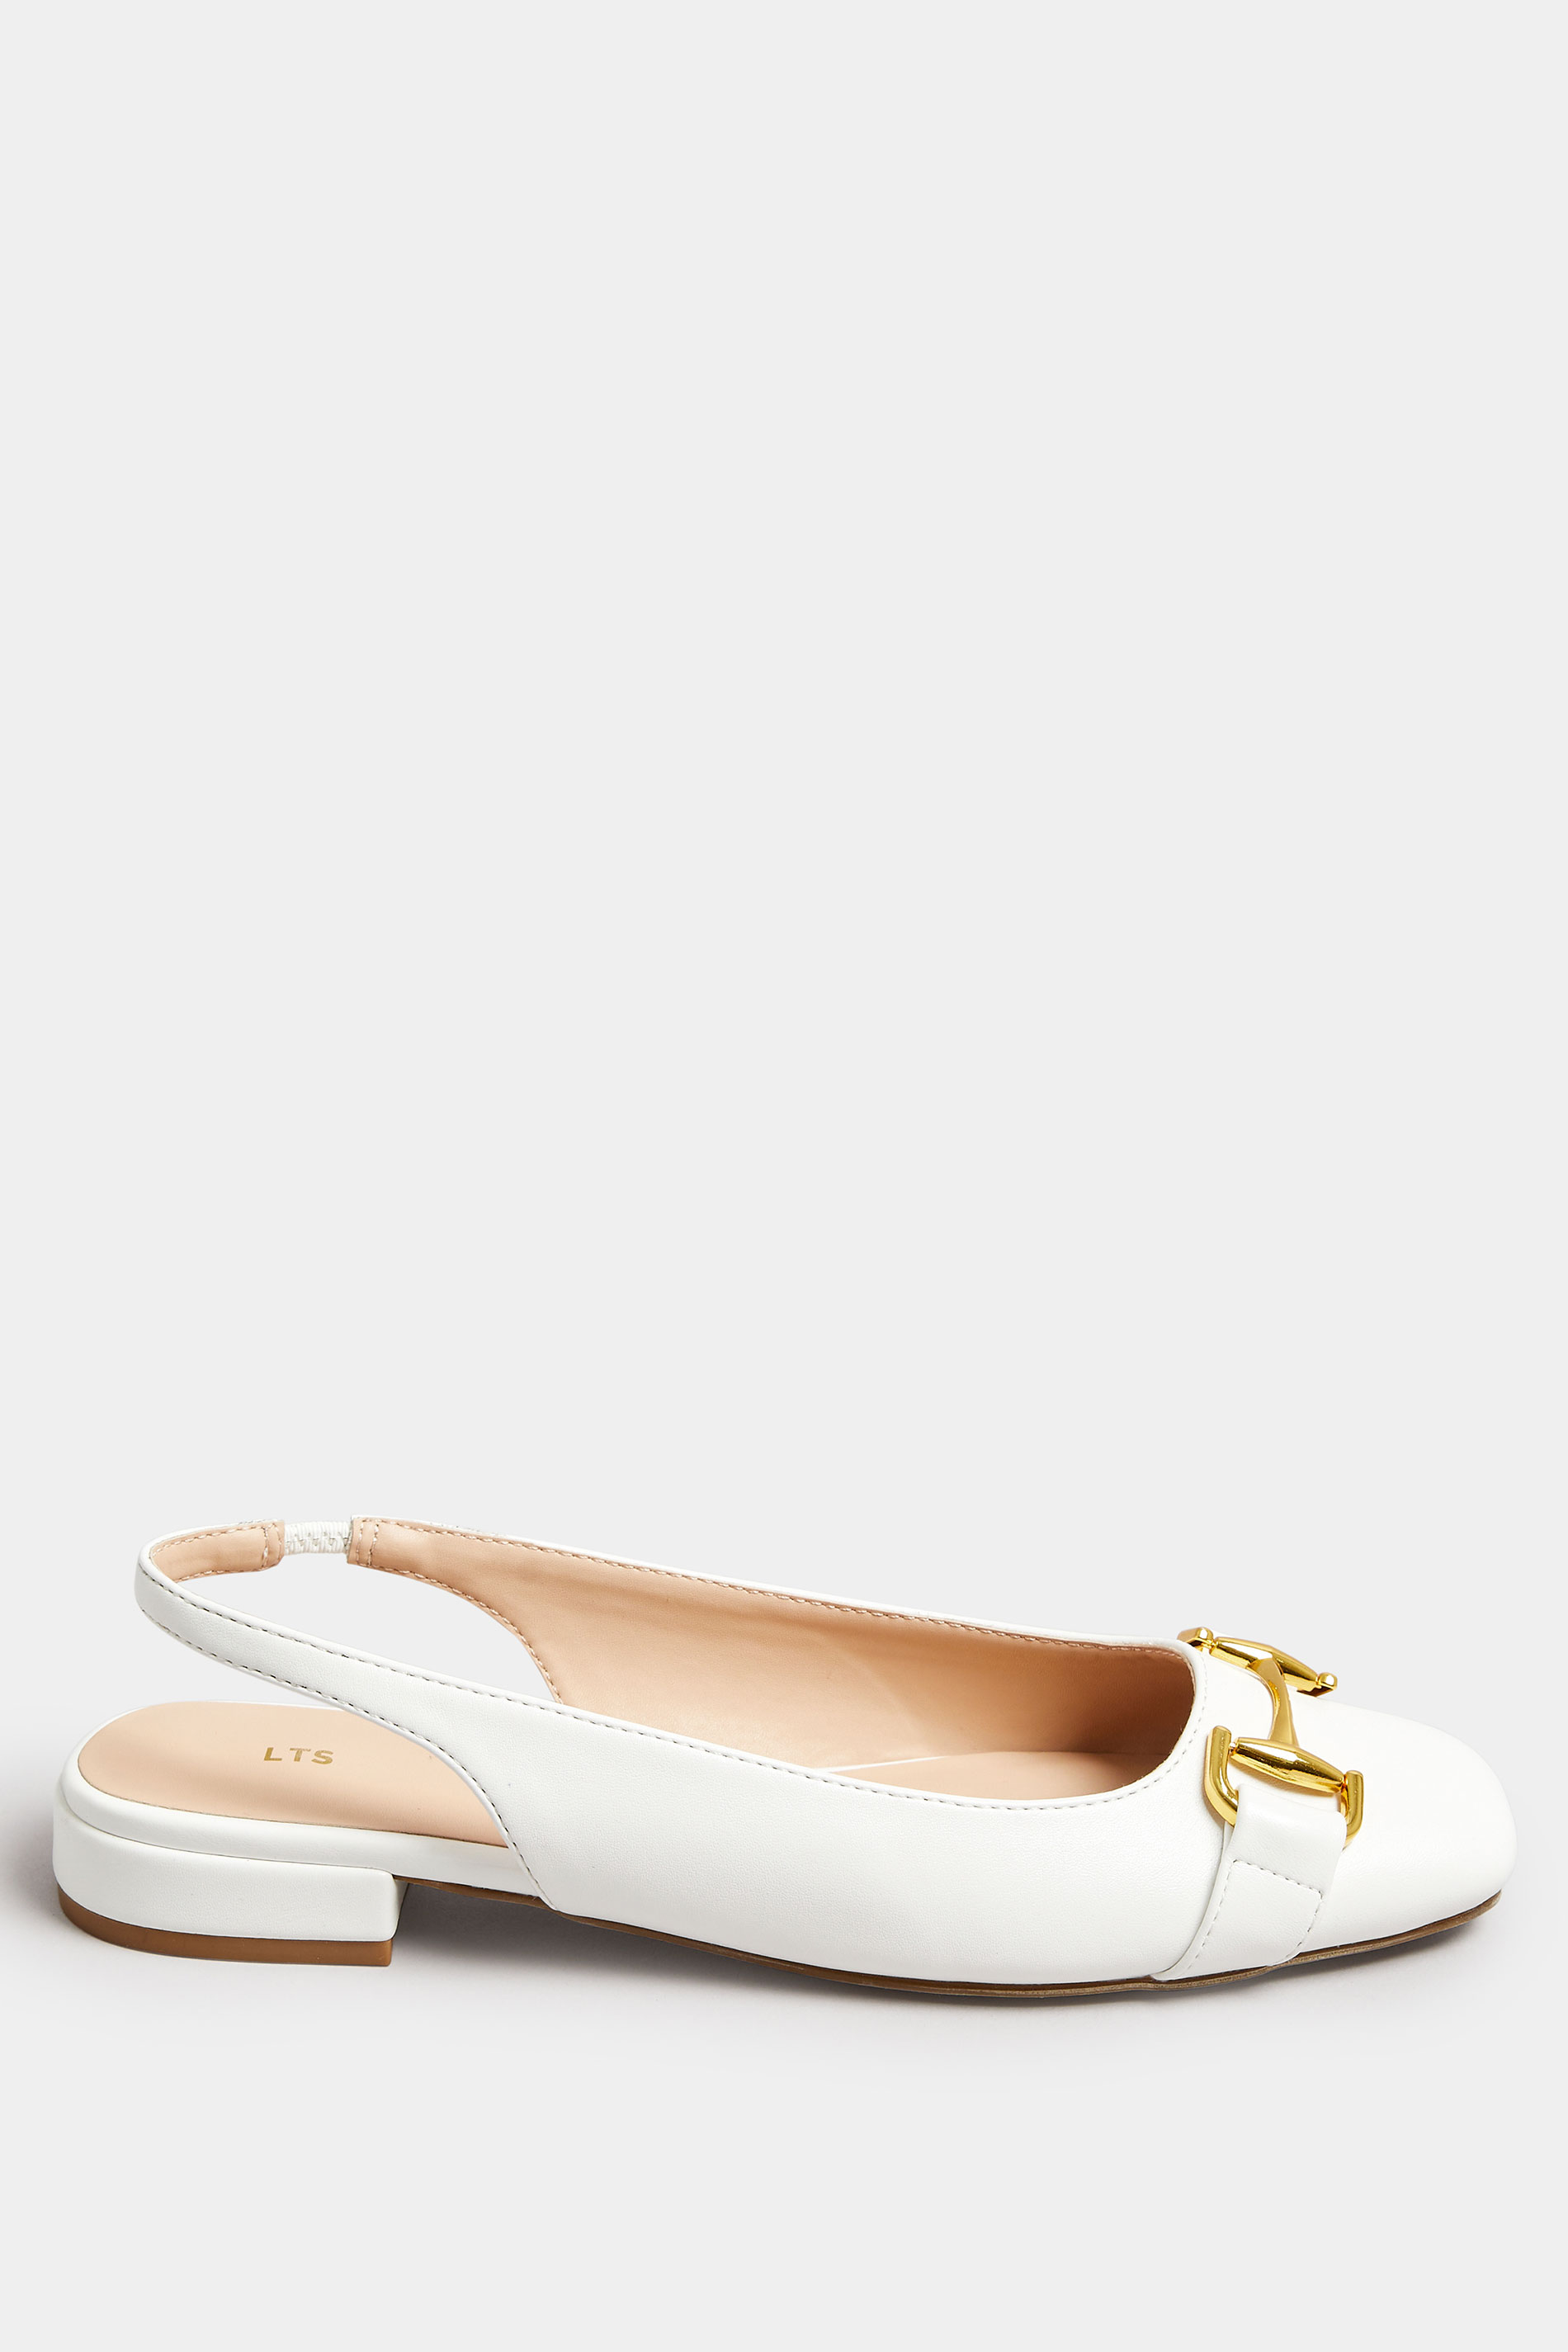 LTS White Buckle Trim Slingback Ballet Pumps In Standard Fit | Long Tall Sally 3